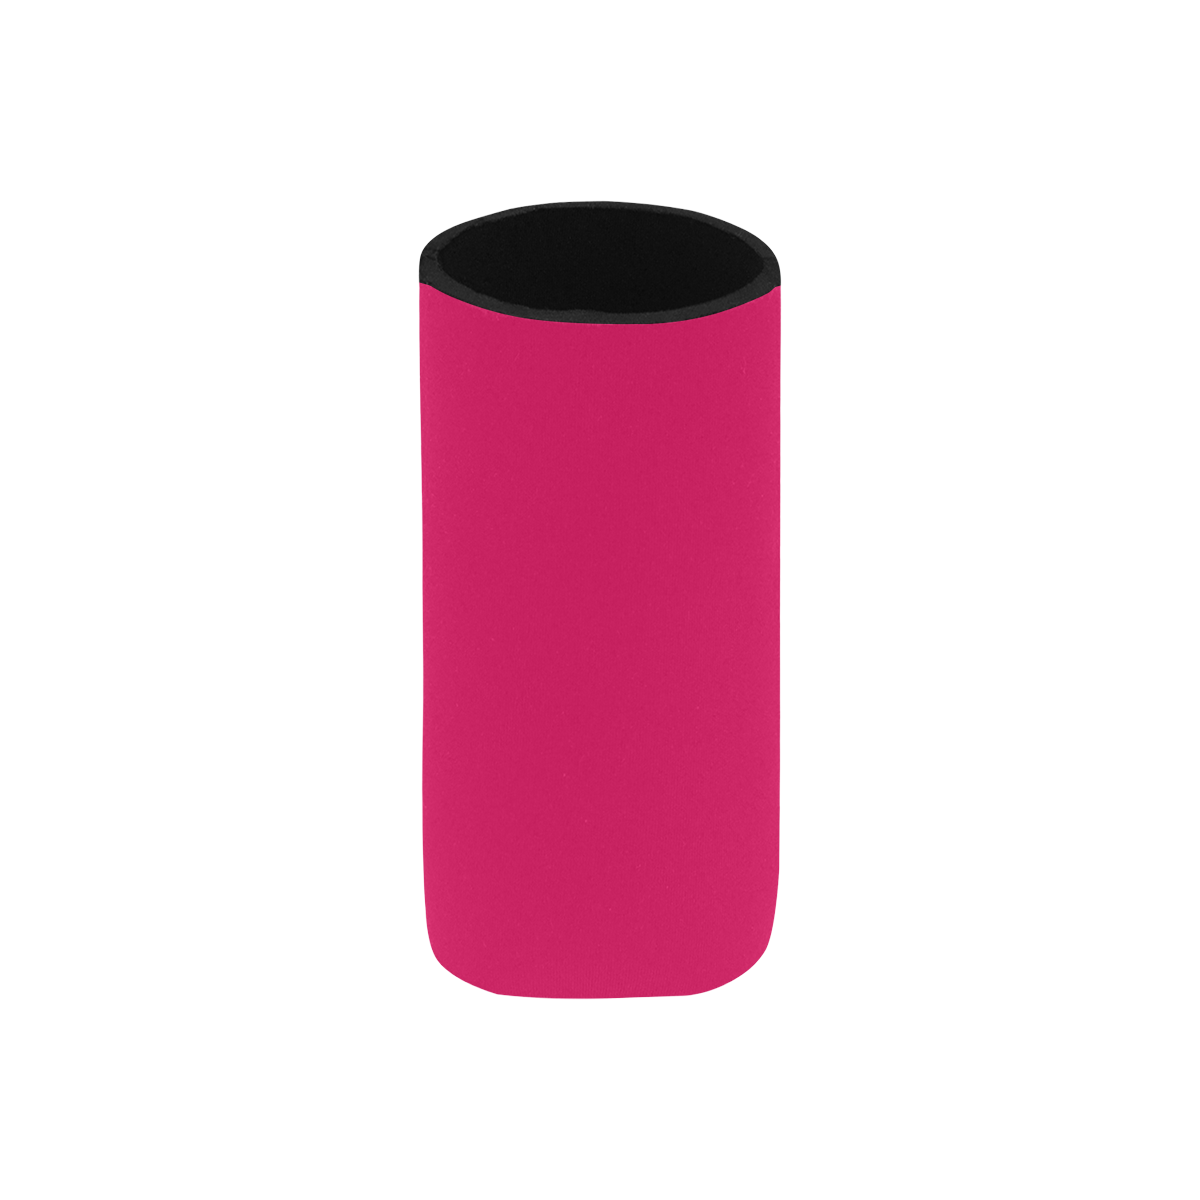 color ruby Neoprene Can Cooler 5" x 2.3" dia.